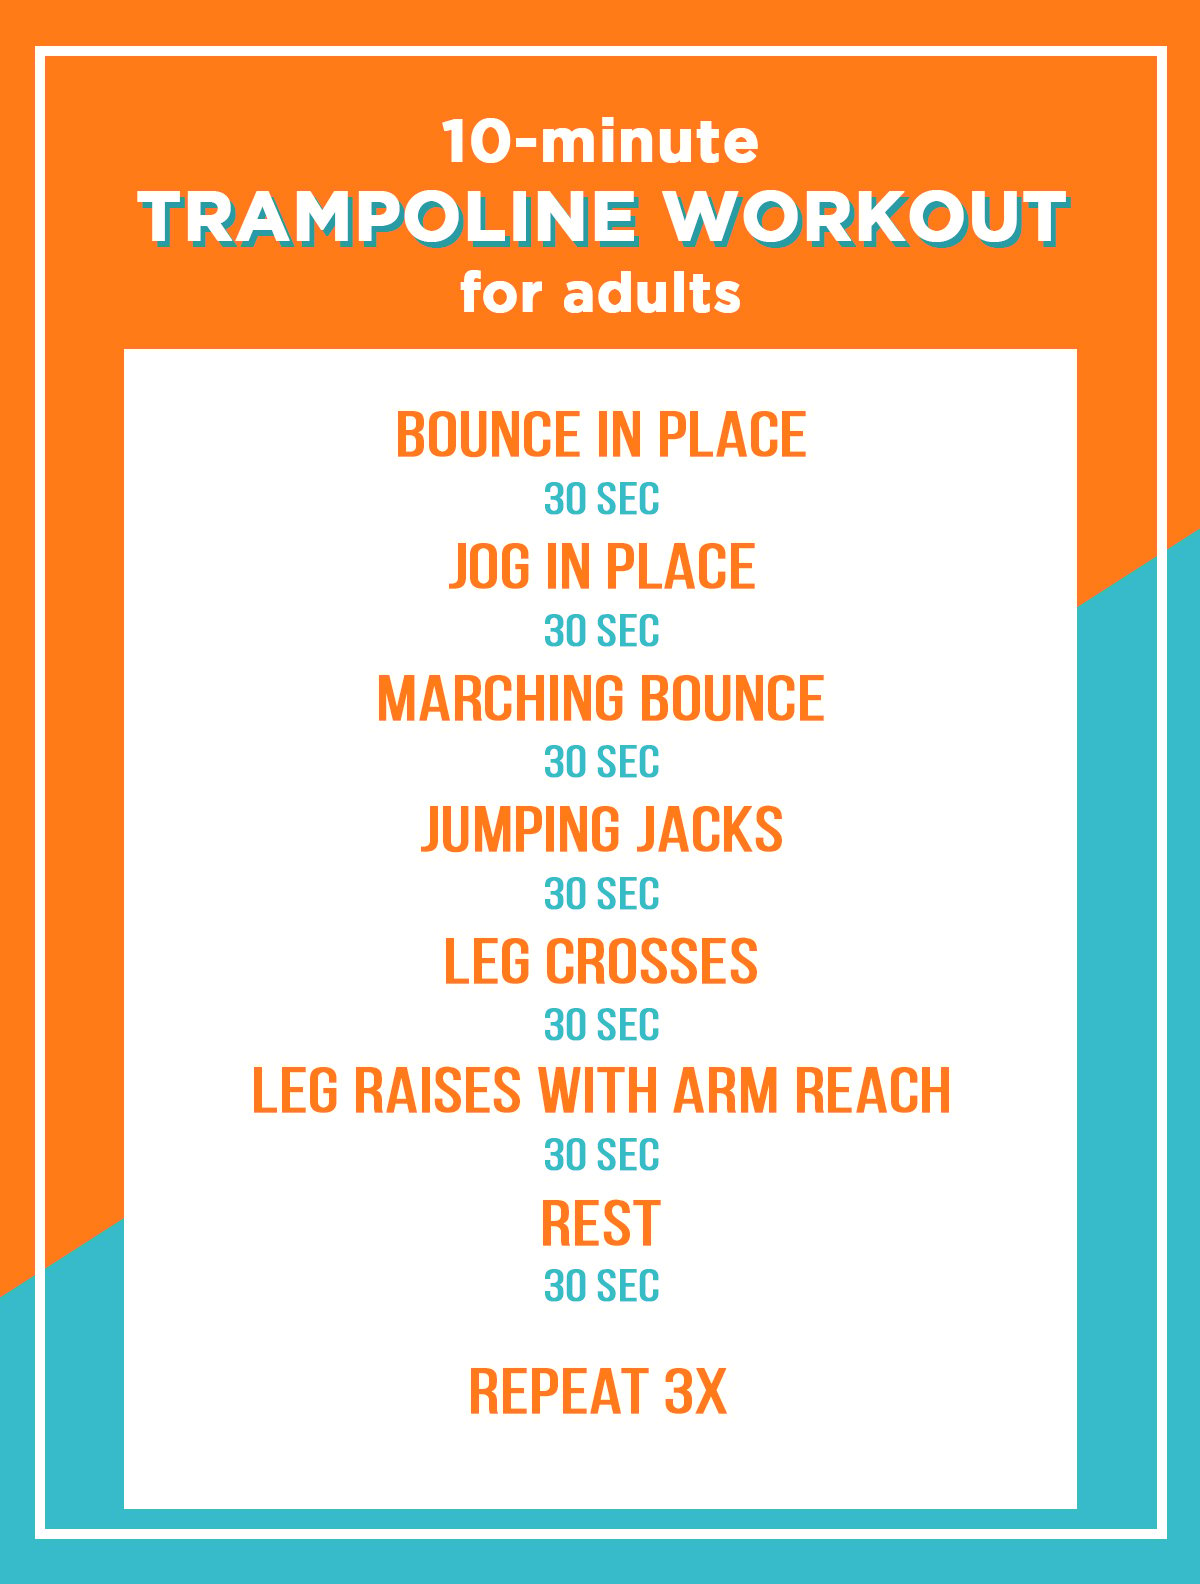 10-minute trampoline workout graphic